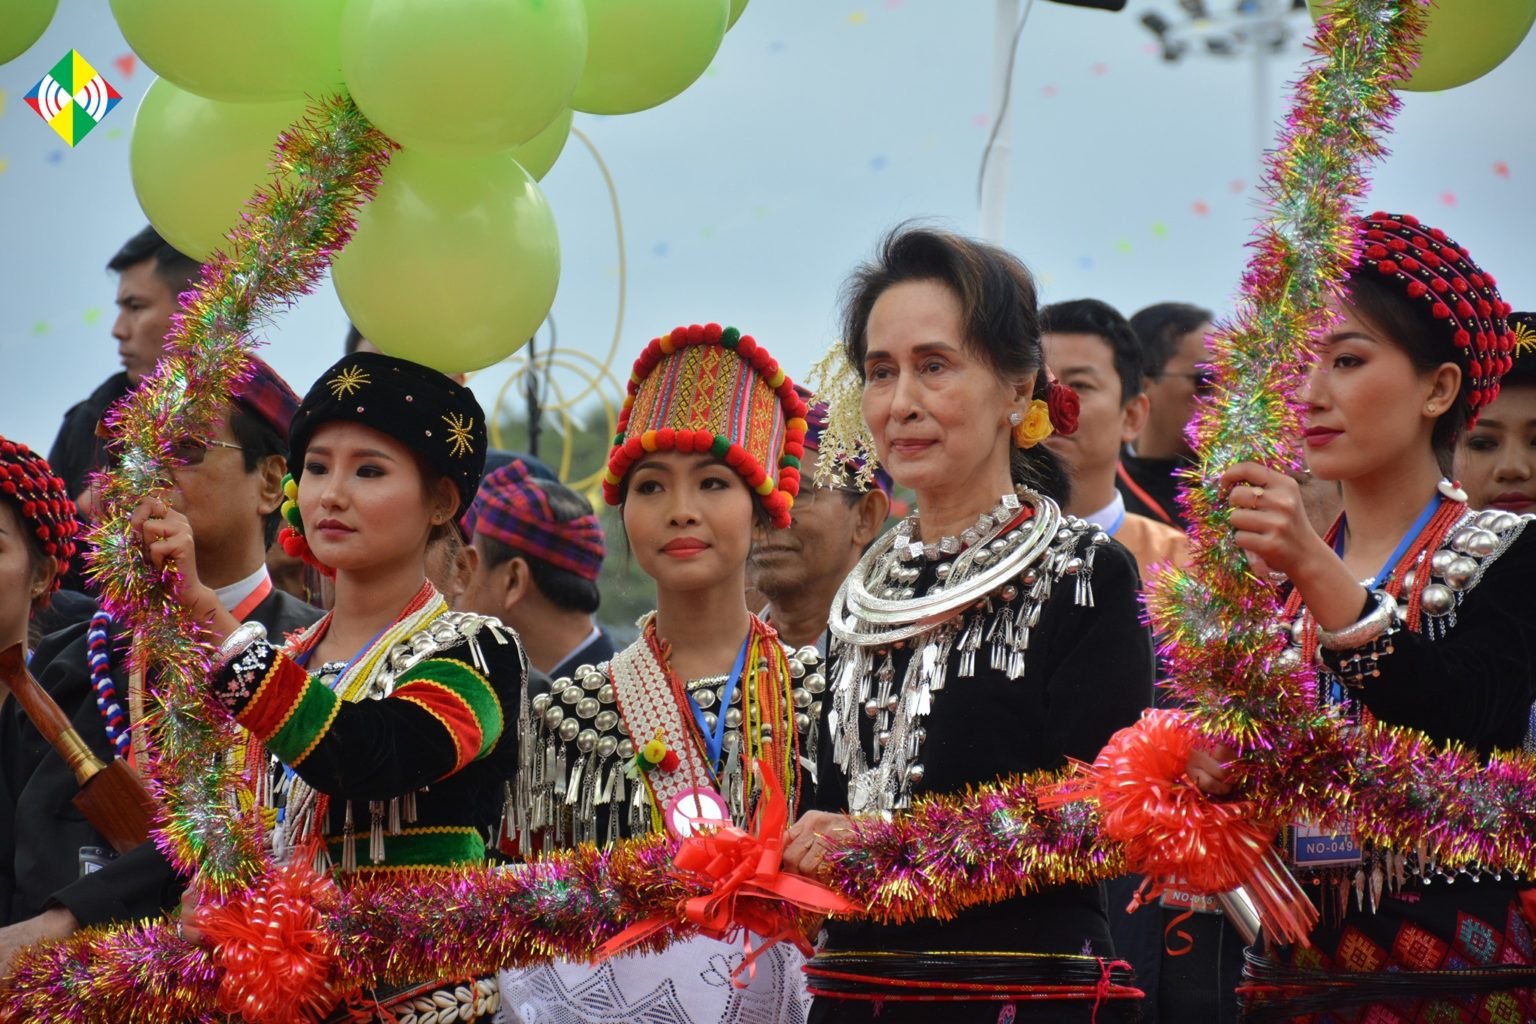 Aung San Suu Kyi Meets Civil Society, Participates in Kachin State Day Event in Myitkyina